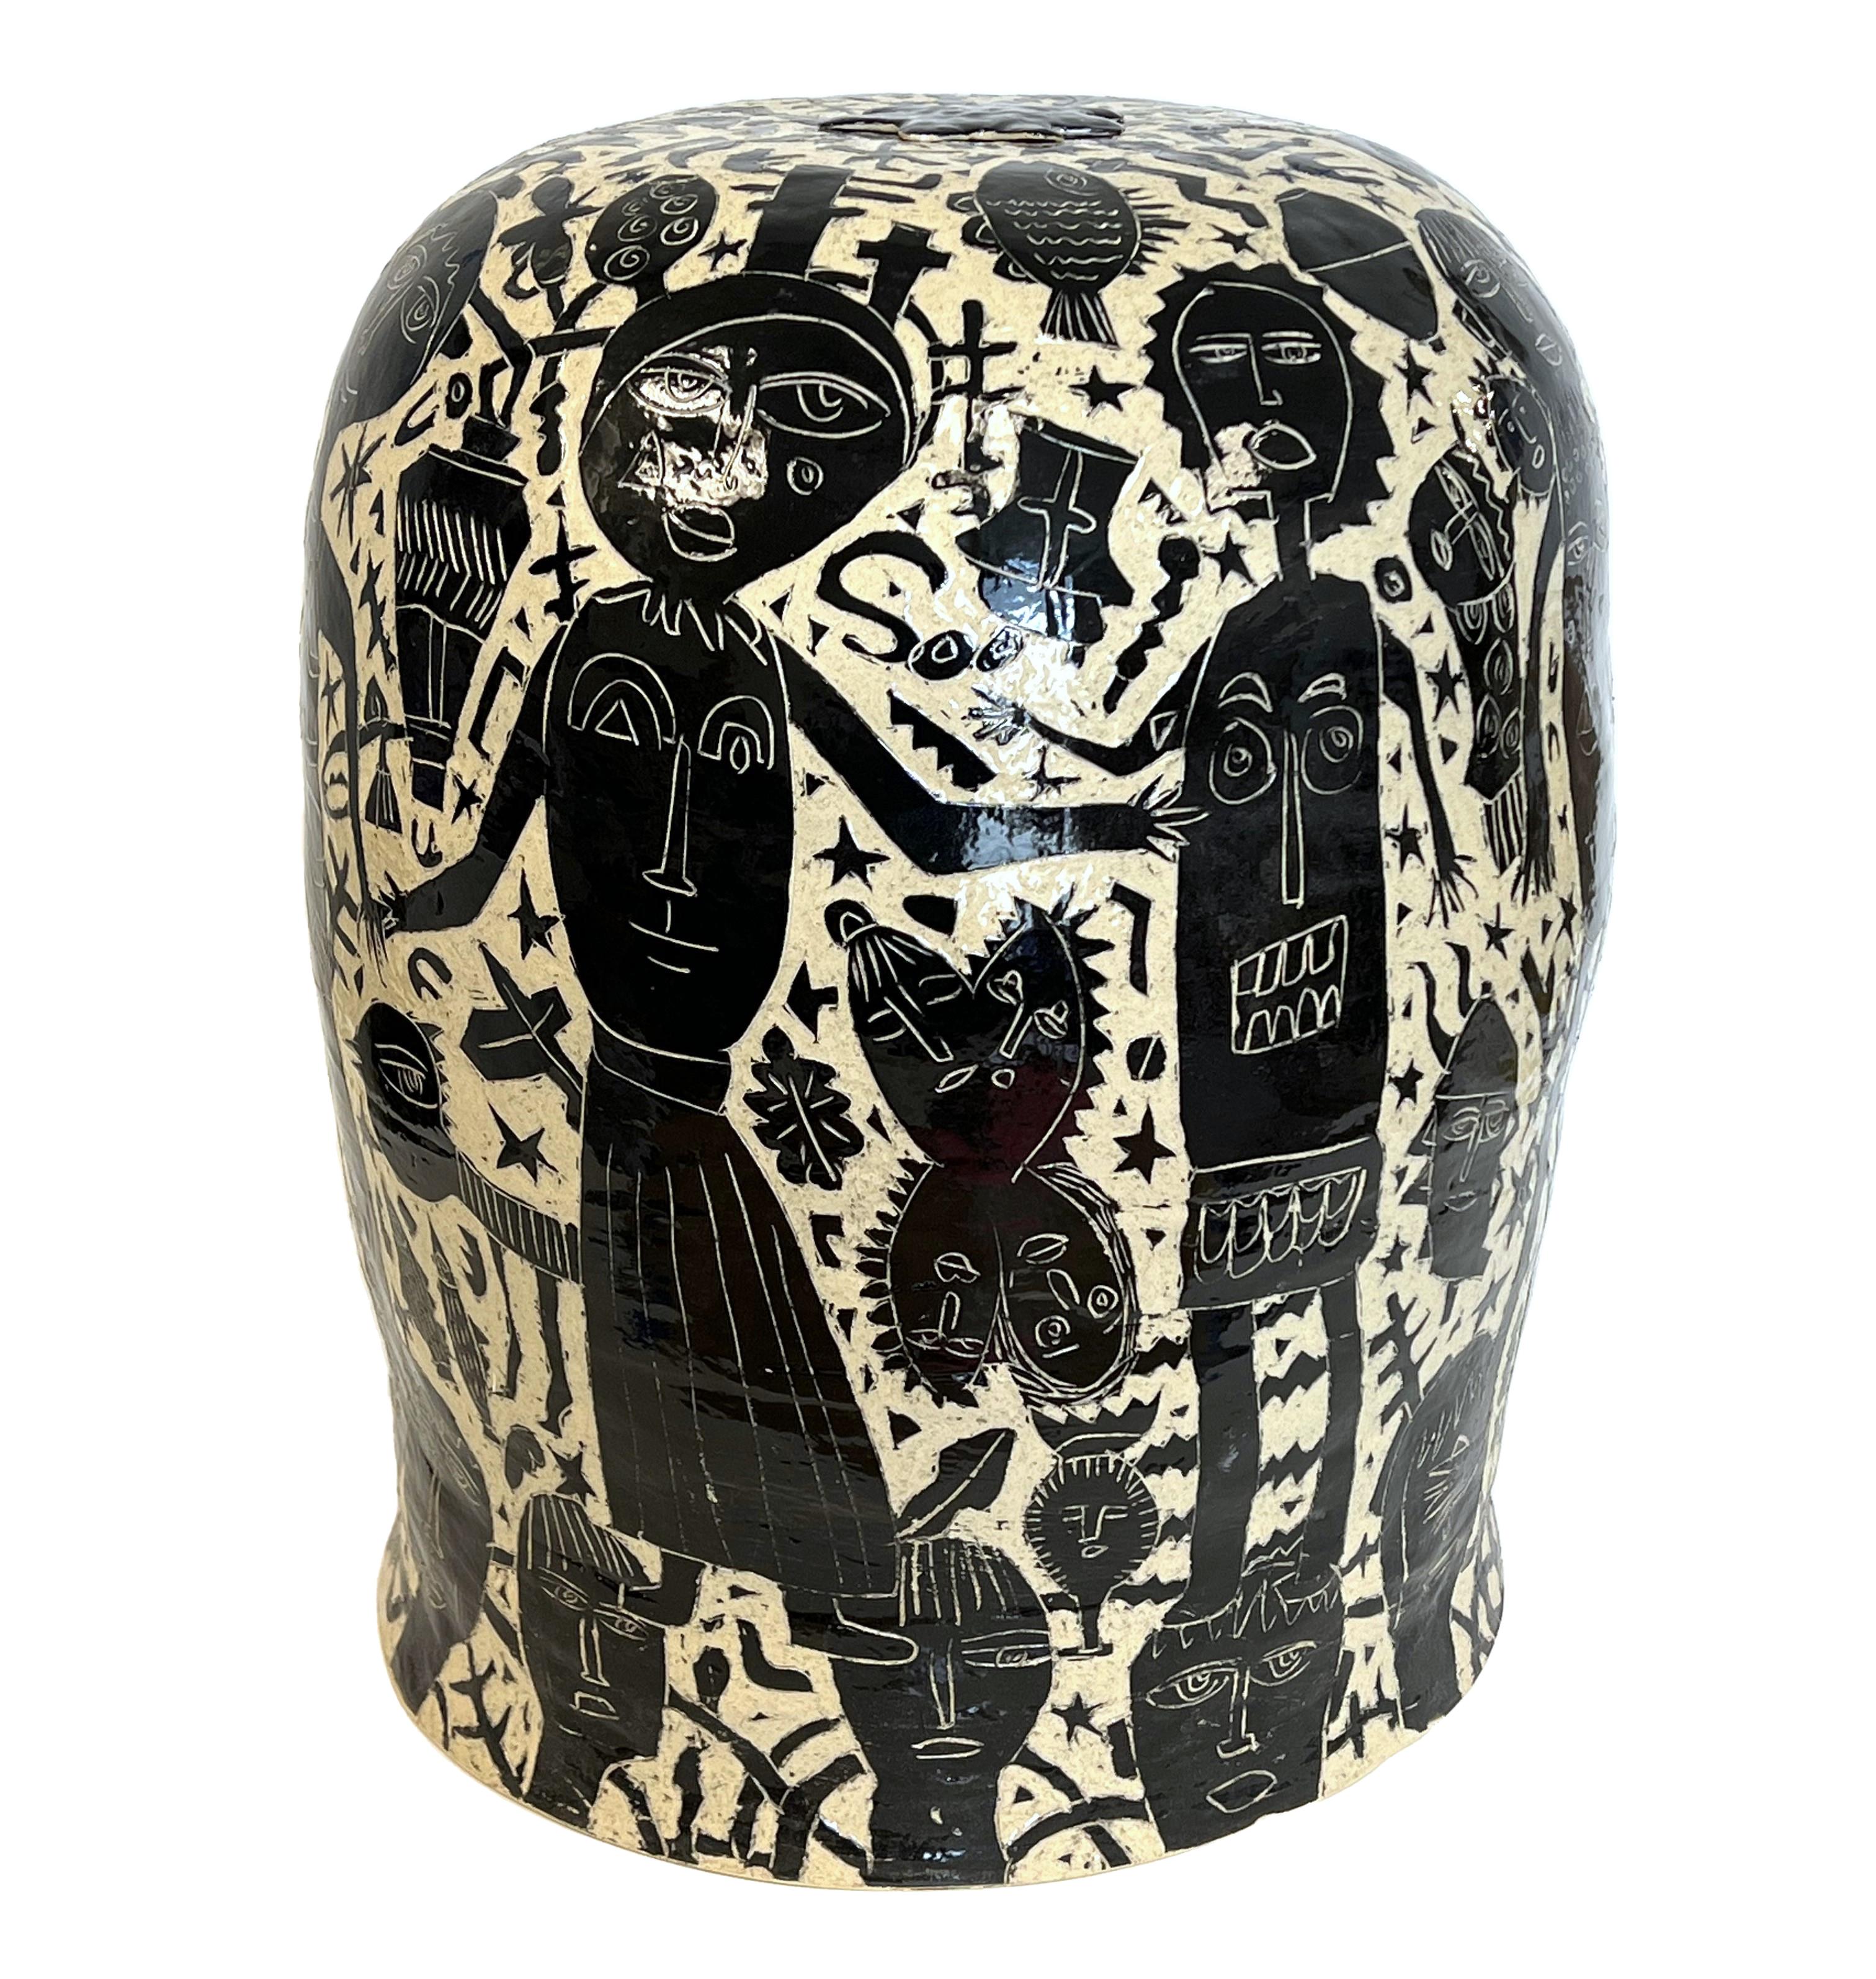 "Feel Your Blue Sky" Large Black & White Stoneware Jar with Figurative Elements - Sculpture by Yeonsoo Kim